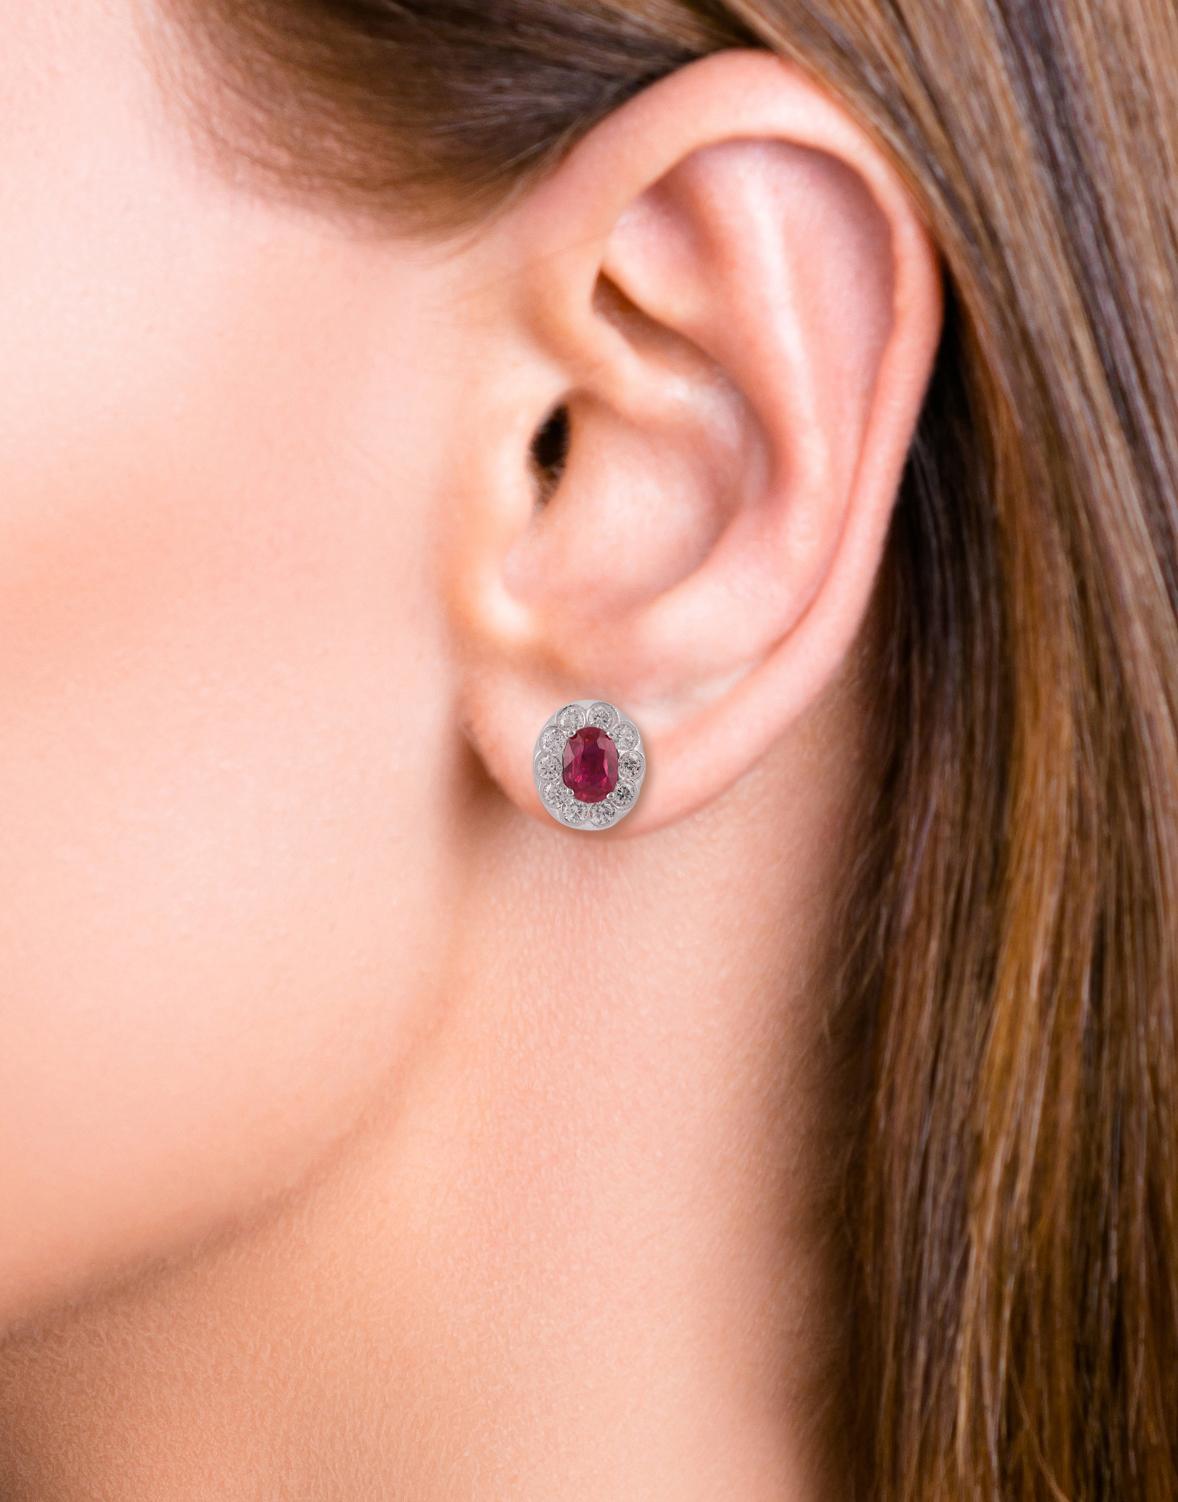 Taille ovale 2.12 Carat Natural Mozambique Ruby & Diamond Earrings Studs in 18k White Gold . en vente